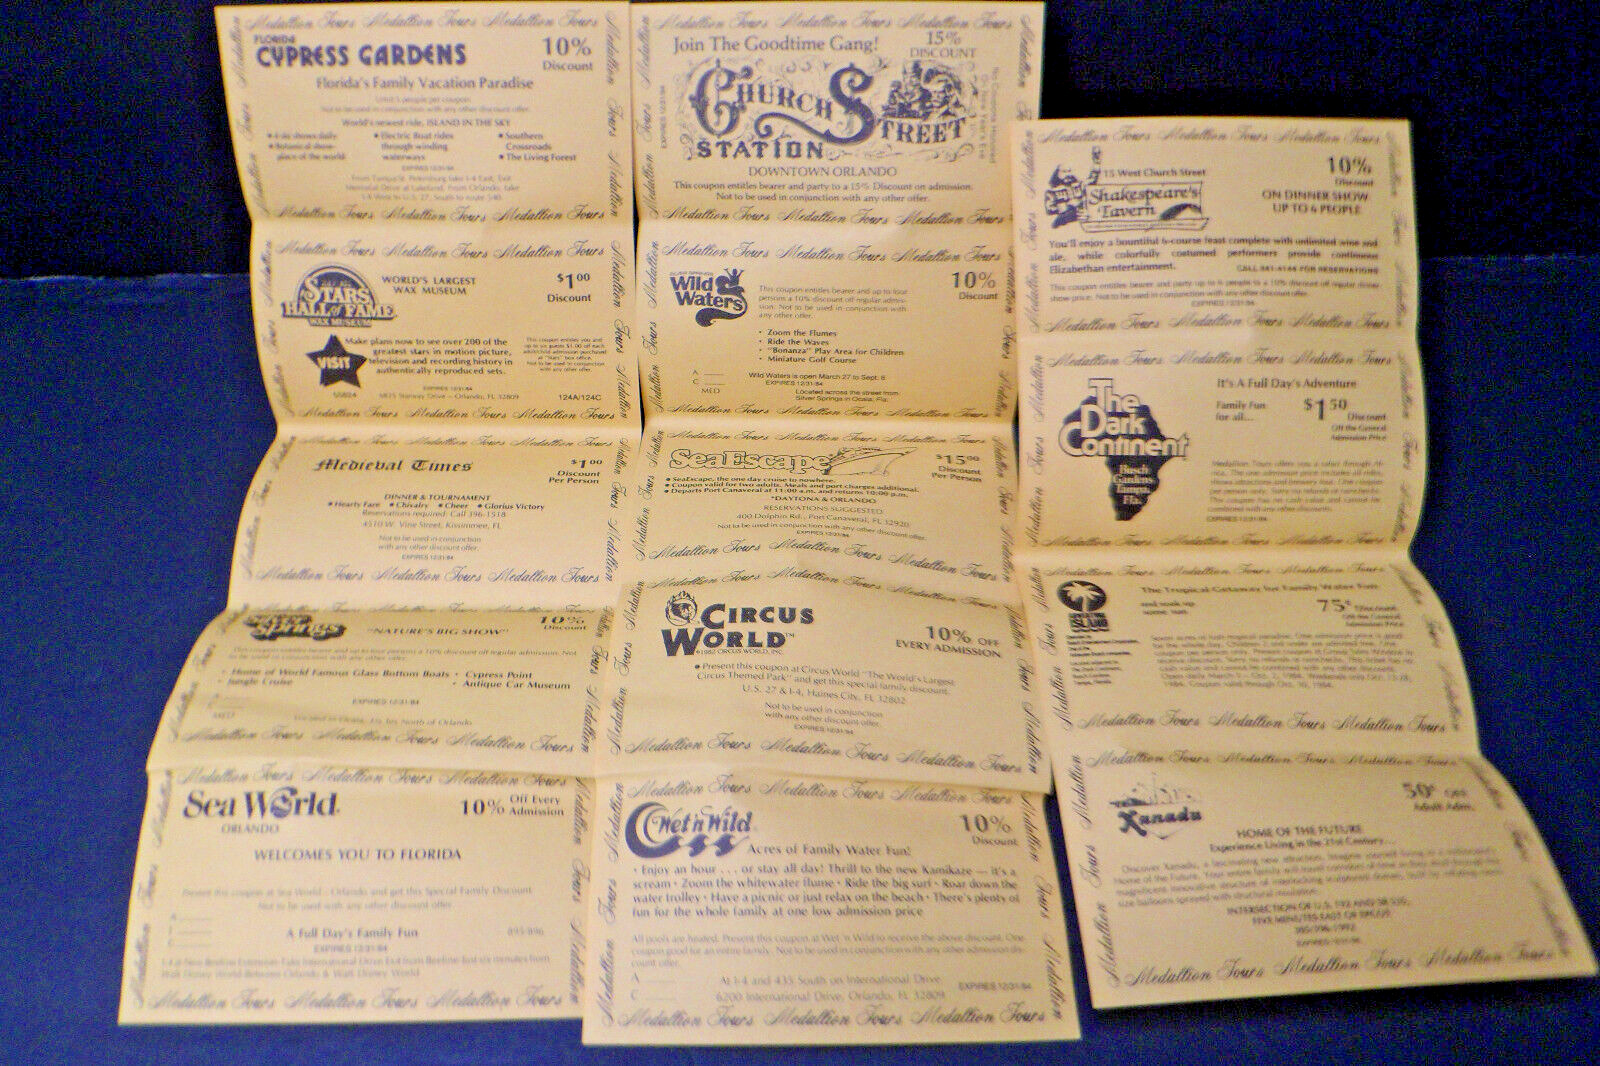 1984 Orlando Central Florida Vintage Tourist Coupons -Classic Closed Attractions